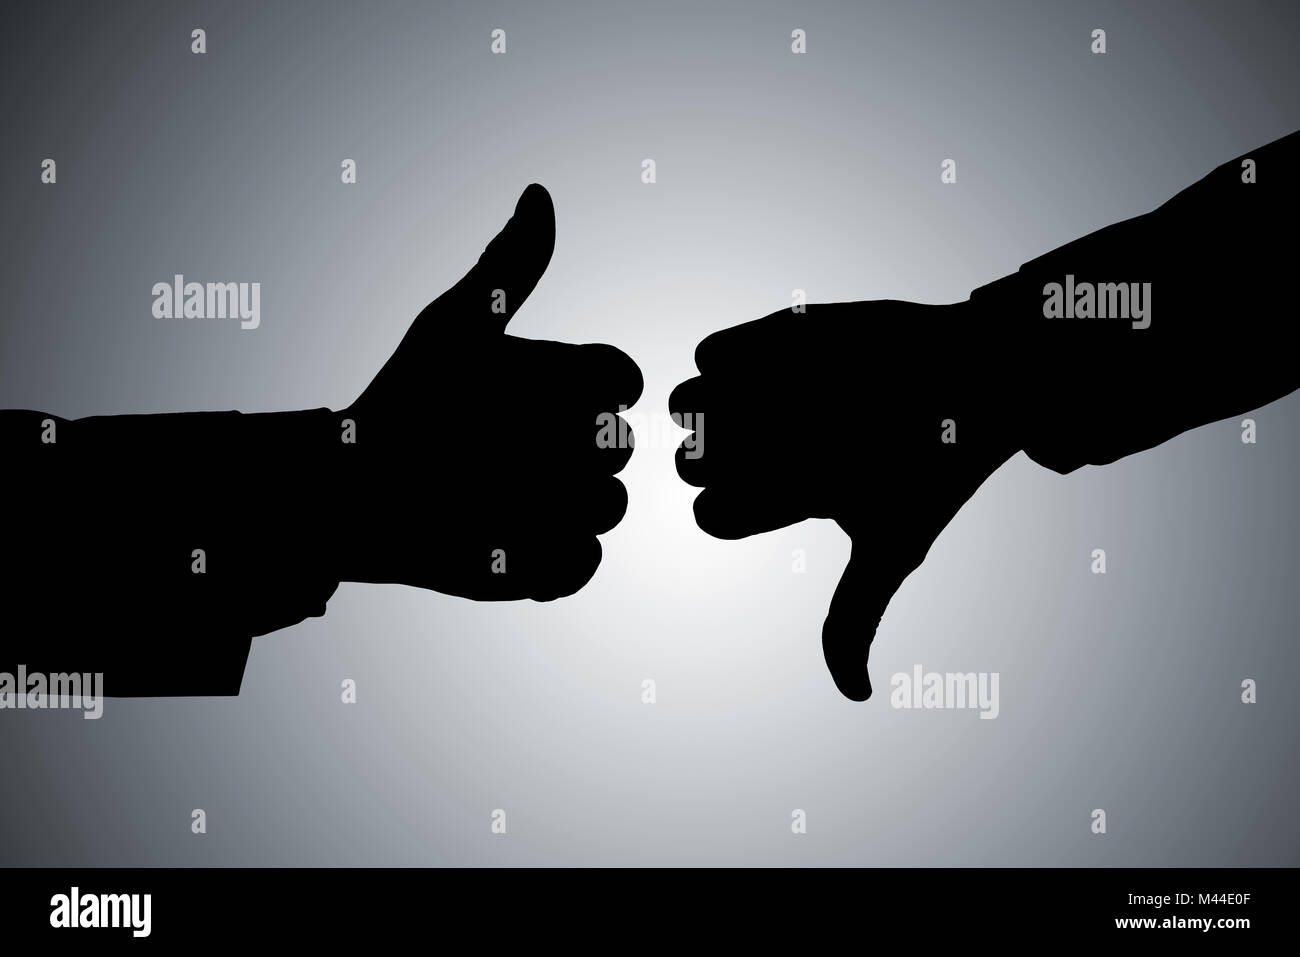 Silhouette Of Two Person's Hand Showing Thumb Up And Thumb Down Against Gray Background Stock Photo